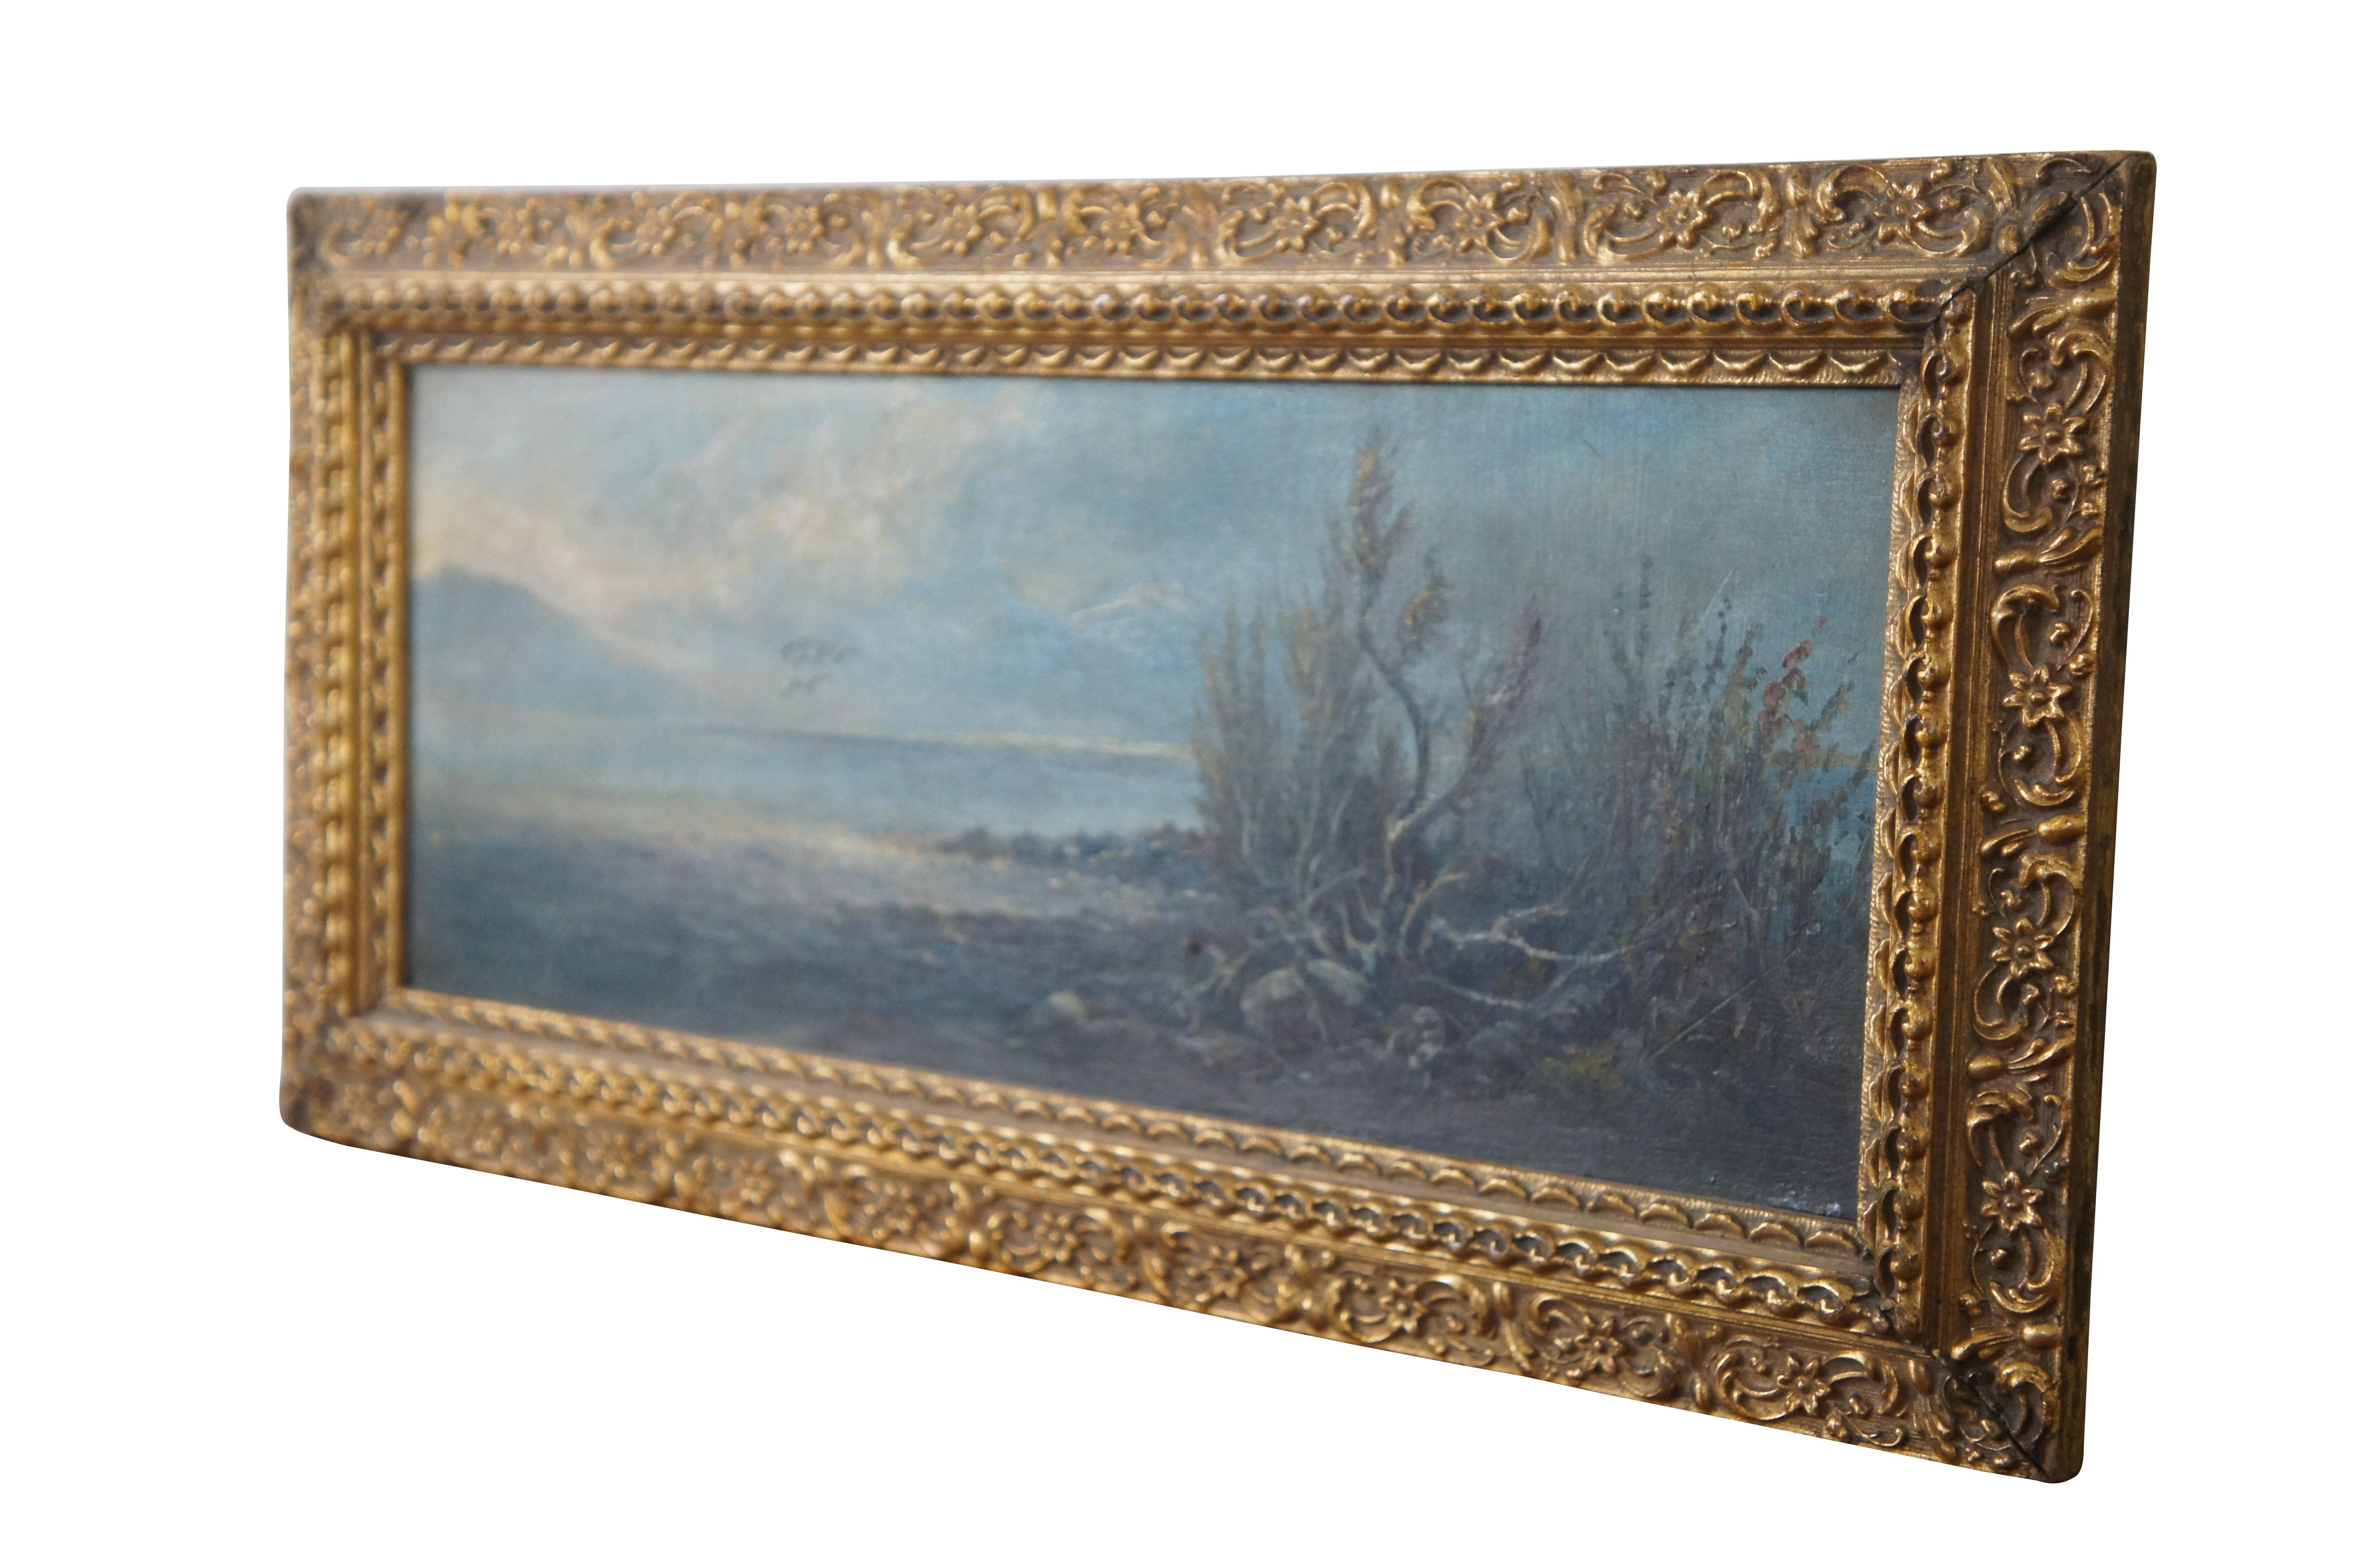 Antique coastal landscape / seascape oil painting on board featuring a group of birds flying over calm water with mountains lining the horizon.  Framed in ornate baroque gold with floral motif.  Signed lower left.

Dimensions:
18.5